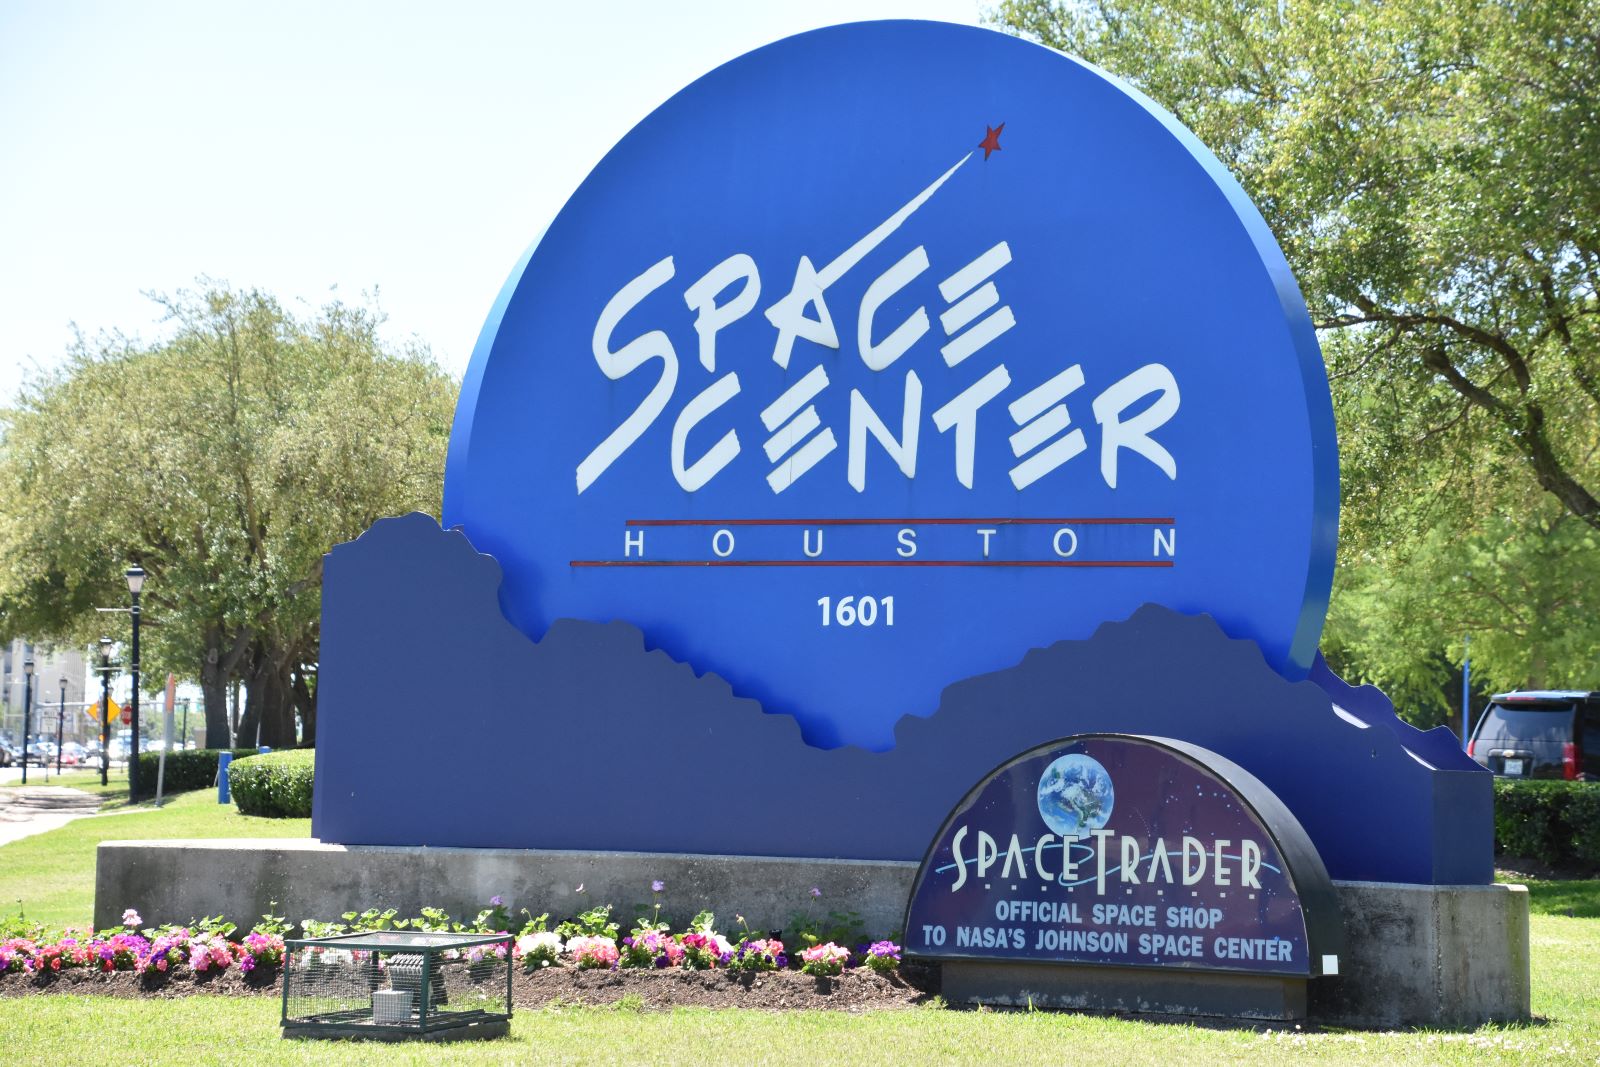 Image credit: Shutterstock / Ritu Manoj Jethani <p>This awe-inspiring center is a hit with kids who dream of space travel. Tip: Buying tickets online in advance can save you money.</p>